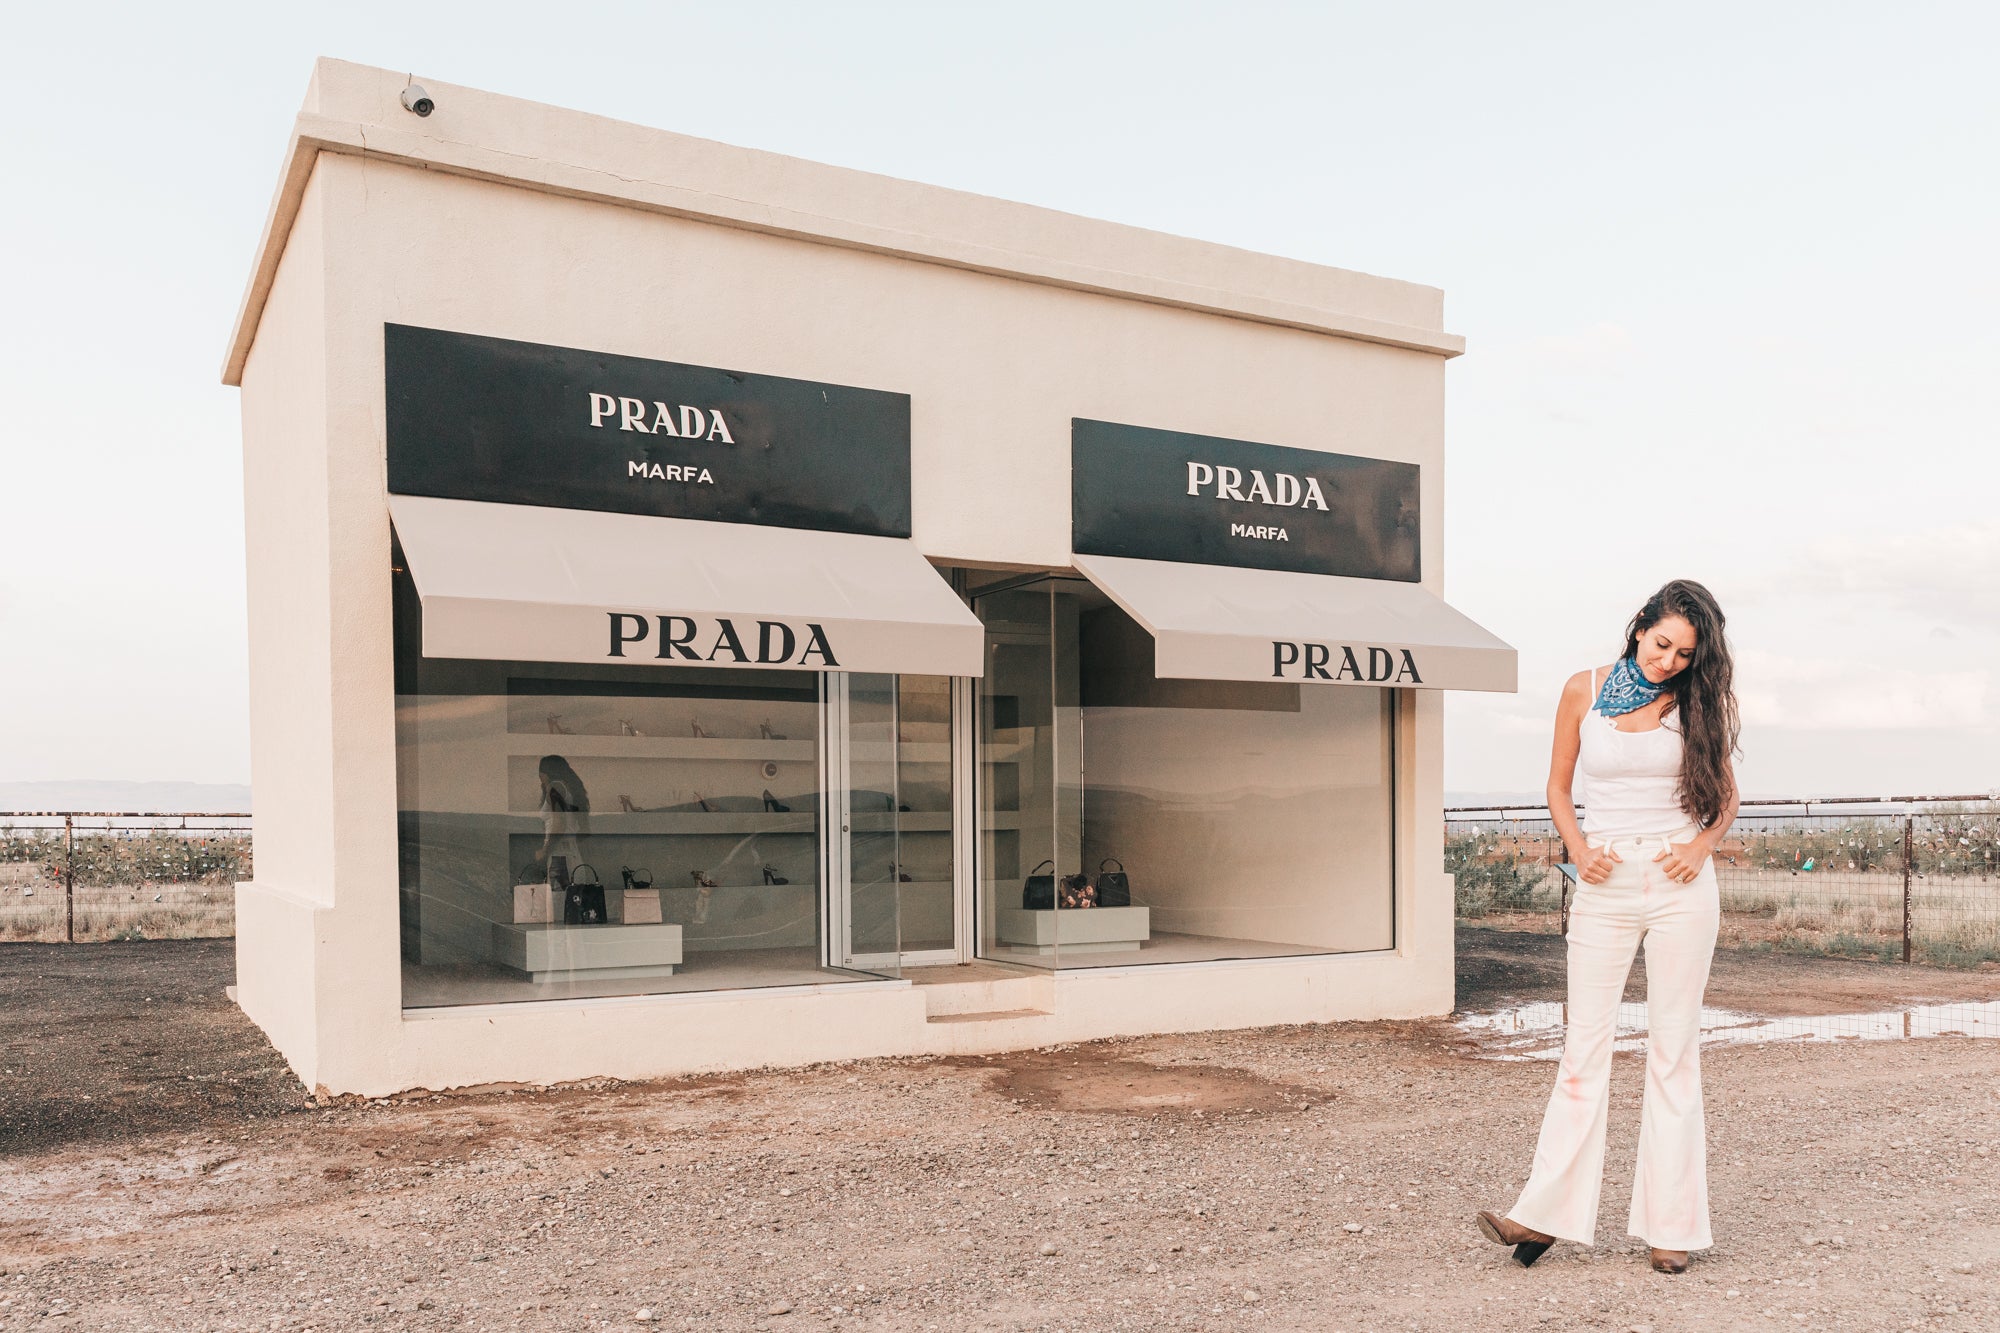 Most Instagrammable Spots in Marfa, Texas